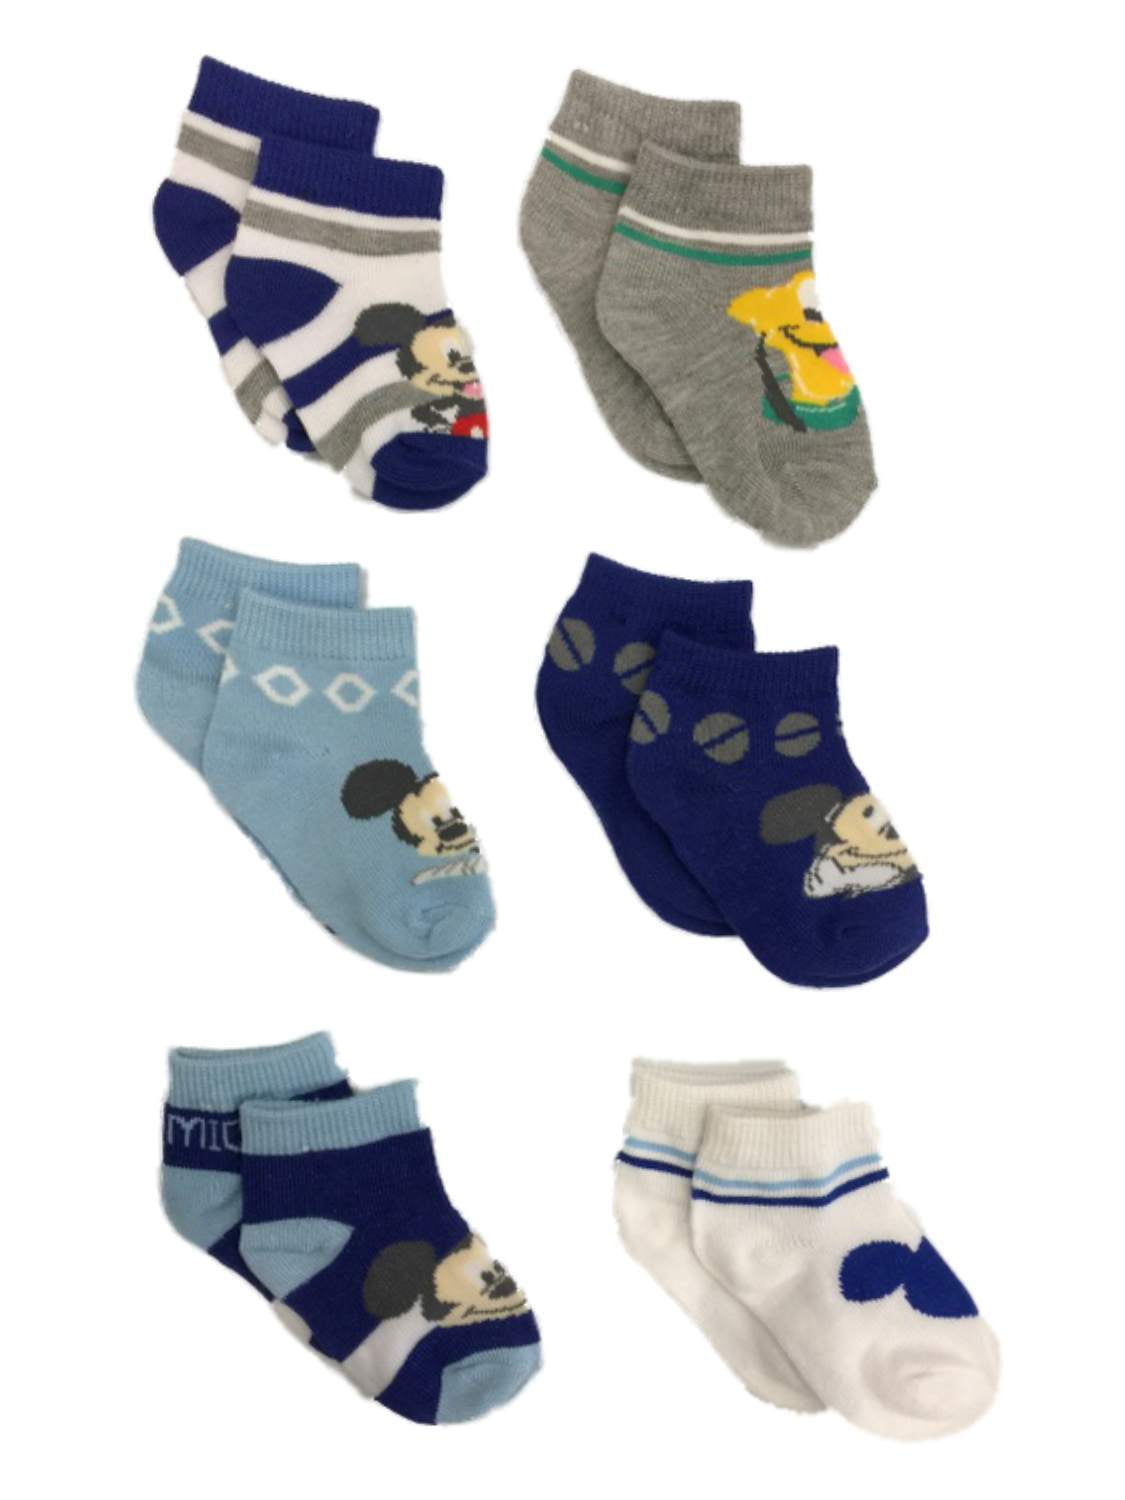 NEW Disney Baby 6-Pair Infant Socks 0-12 Months CHOOSE MINNIE OR MICKEY MOUSE 